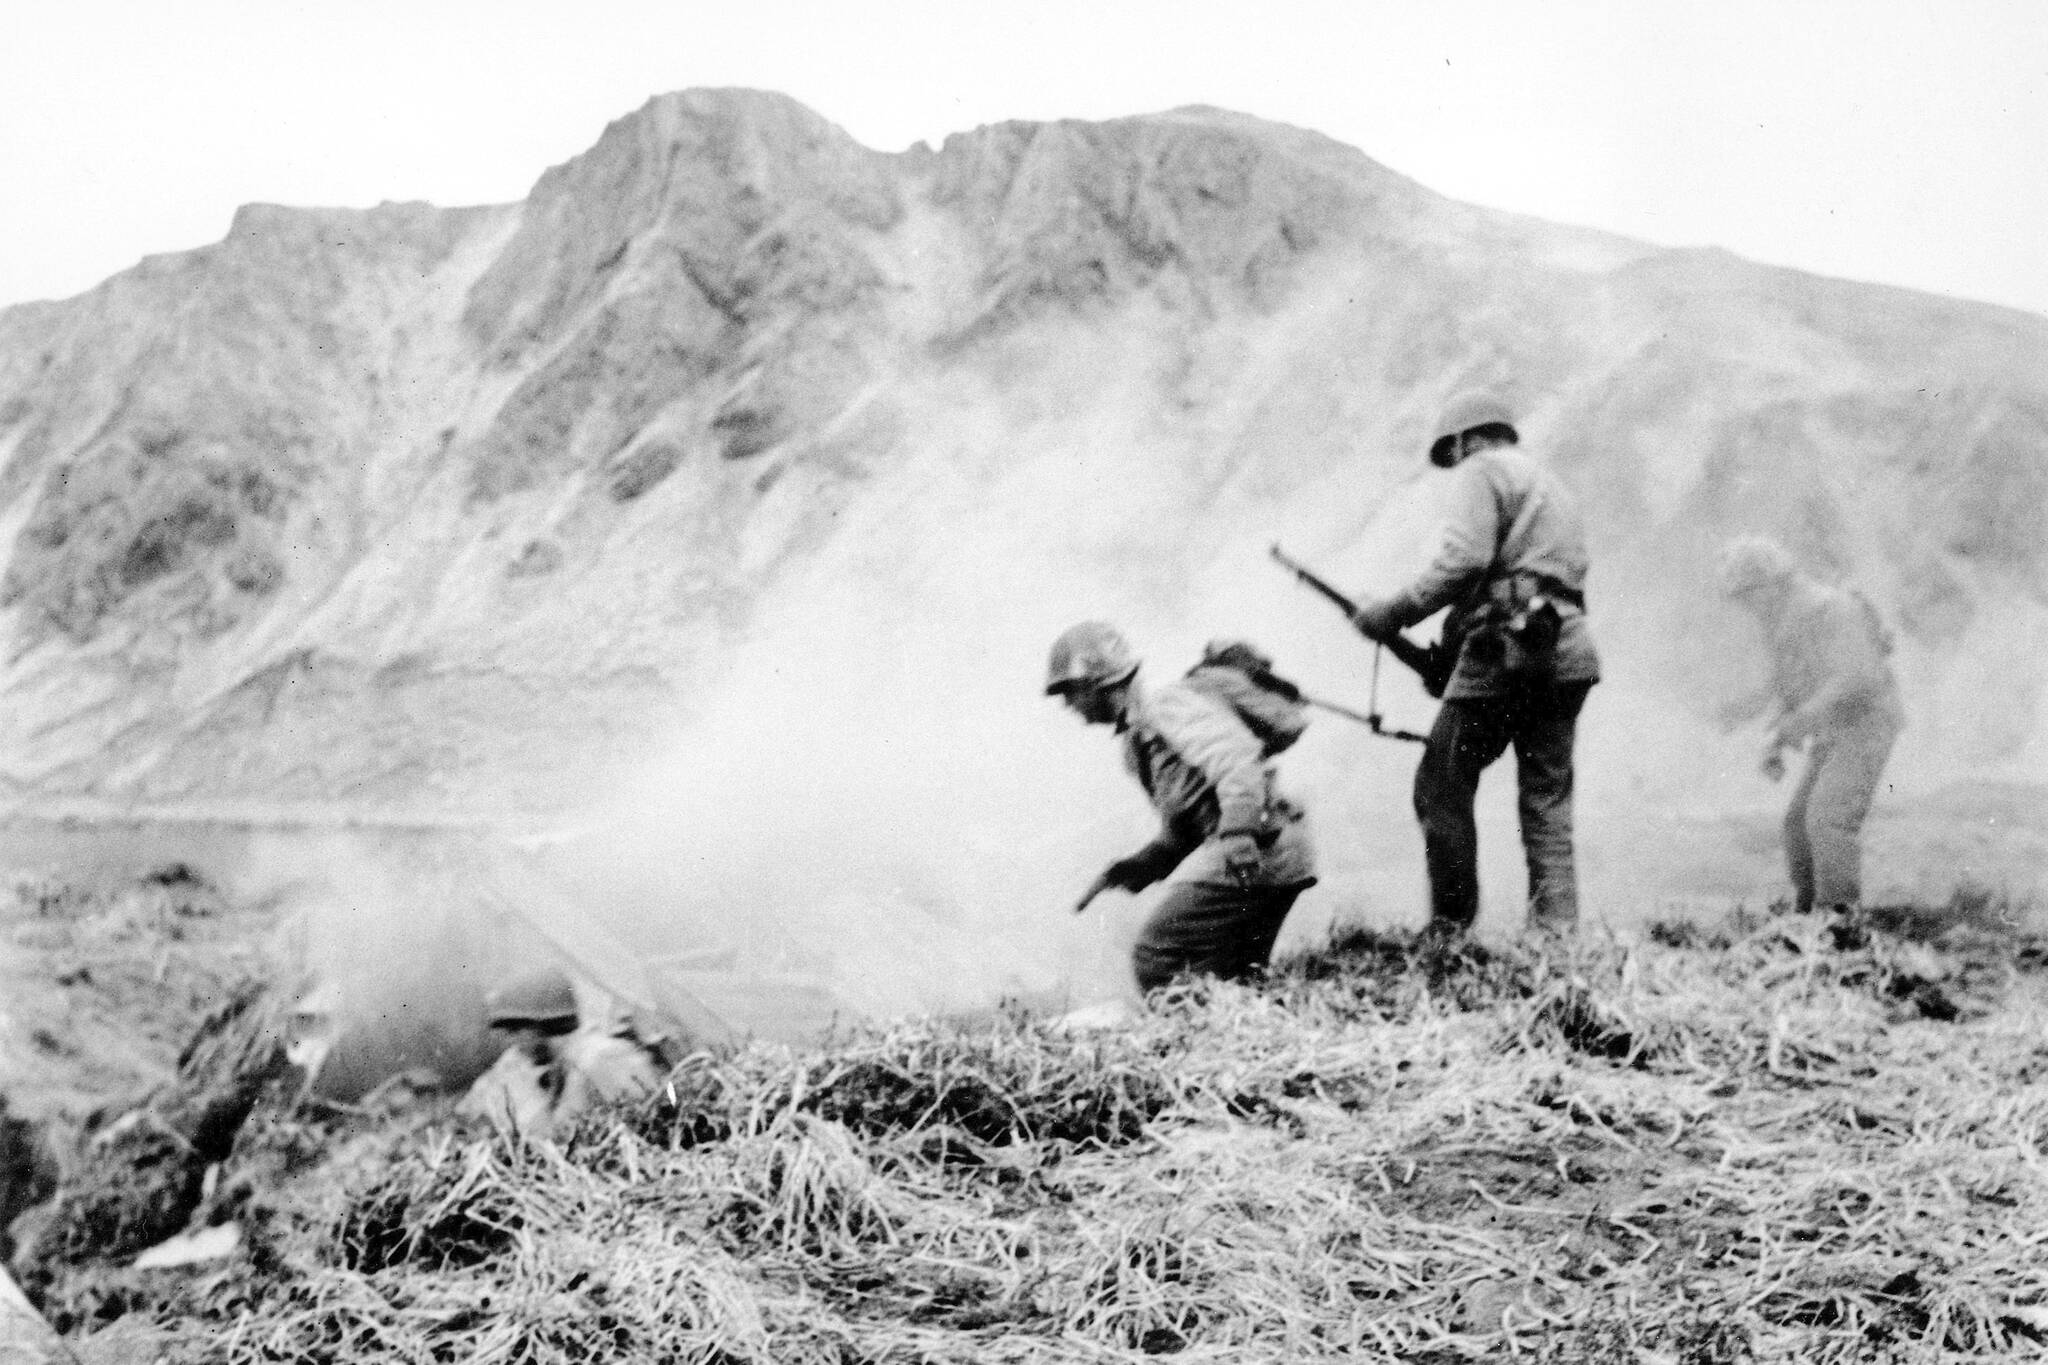 A U.S. squad armed with guns and hand grenades closes in on Japanese holdouts entrenched in dugouts during World War II on Attu Island, Alaska, in June 1943. Gregory Golodoff, who was 3 years old when his remote Alaska island was captured by Japanese troops and who became the last survivor among its 41 residents sent to Japan as prisoners, has died. The island of Attu in the Aleutian chain was one of just a few U.S. territories taken by enemy forces during the war, and the American effort to reclaim it amid frigid rain, dense fog and hurricane-force winds was the only battle of the war fought on North American soil. (U.S. Army via AP, File)